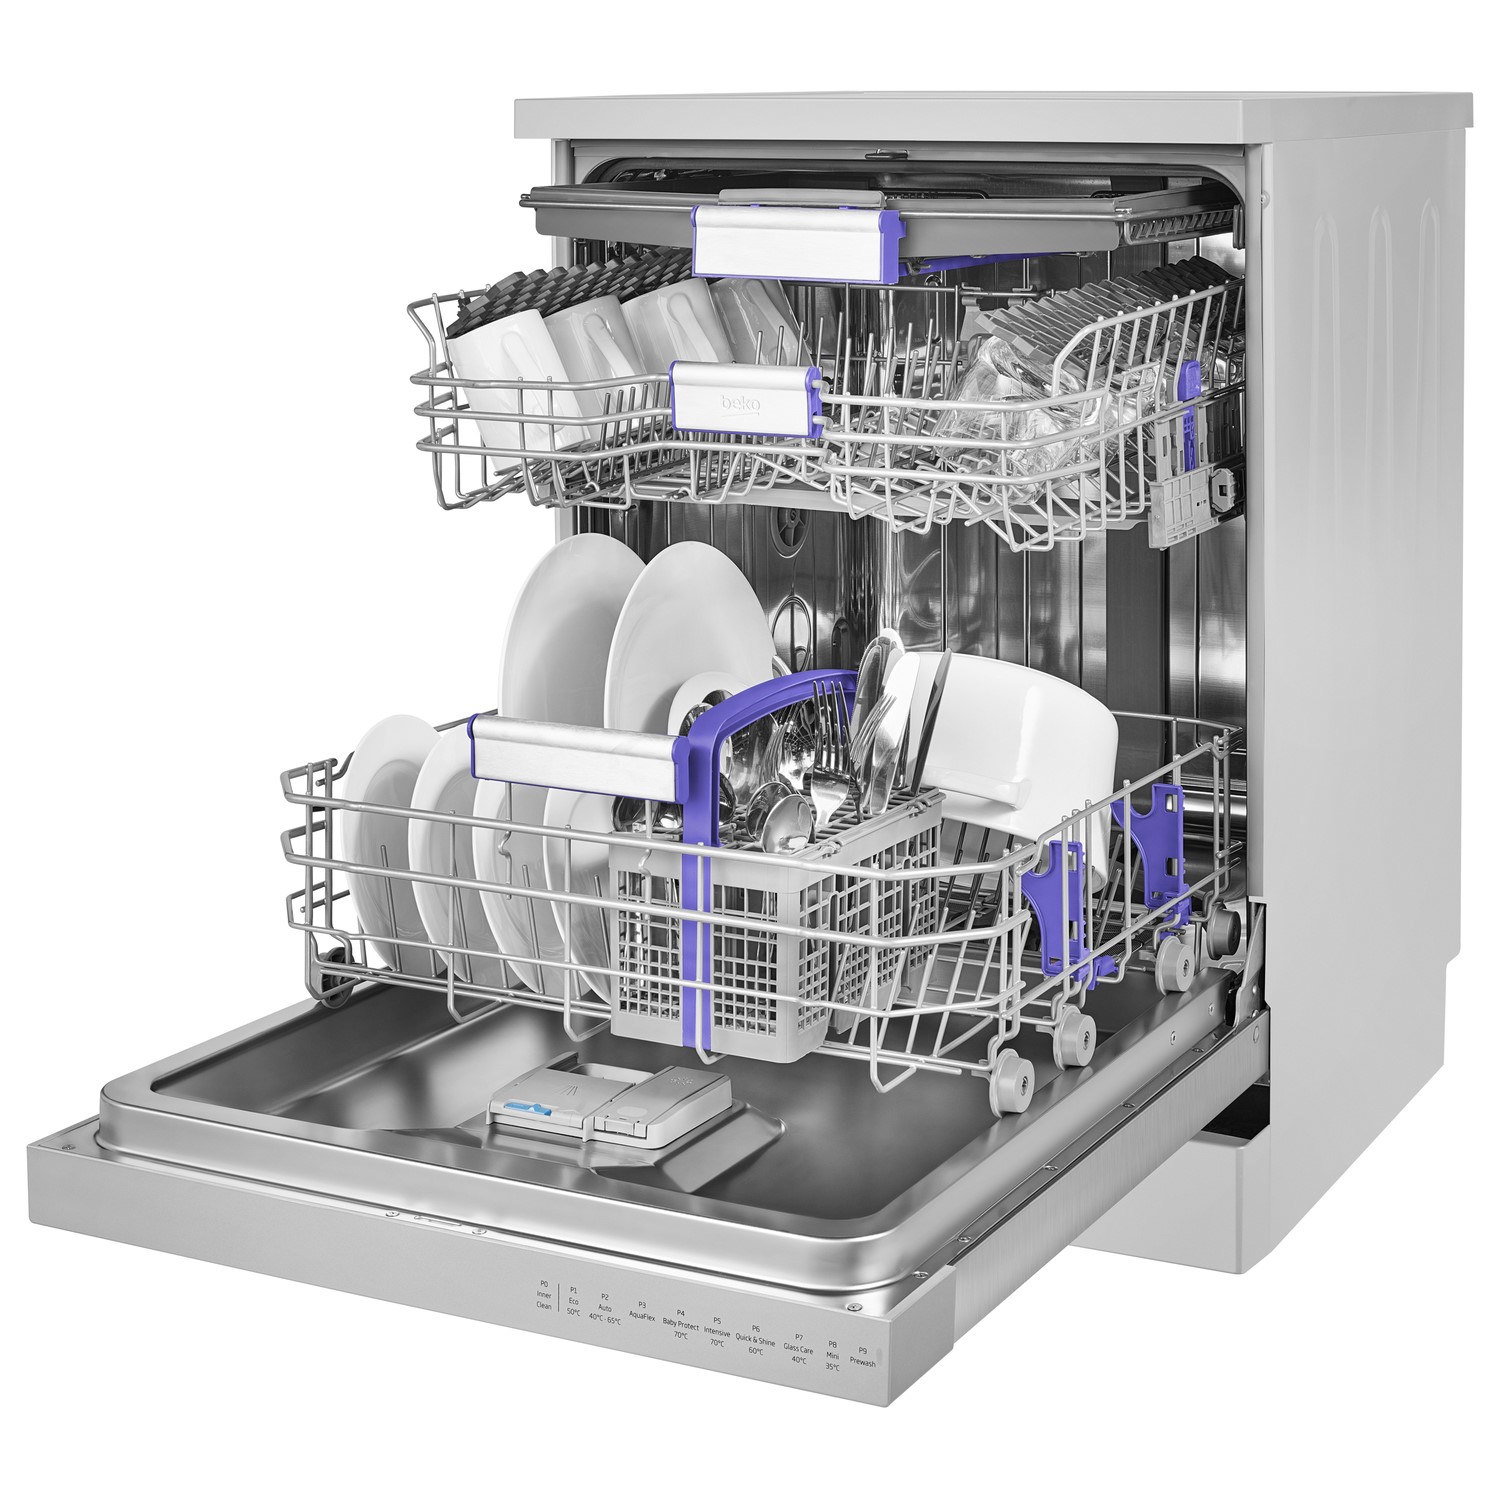 dishwasher with top cutlery drawer